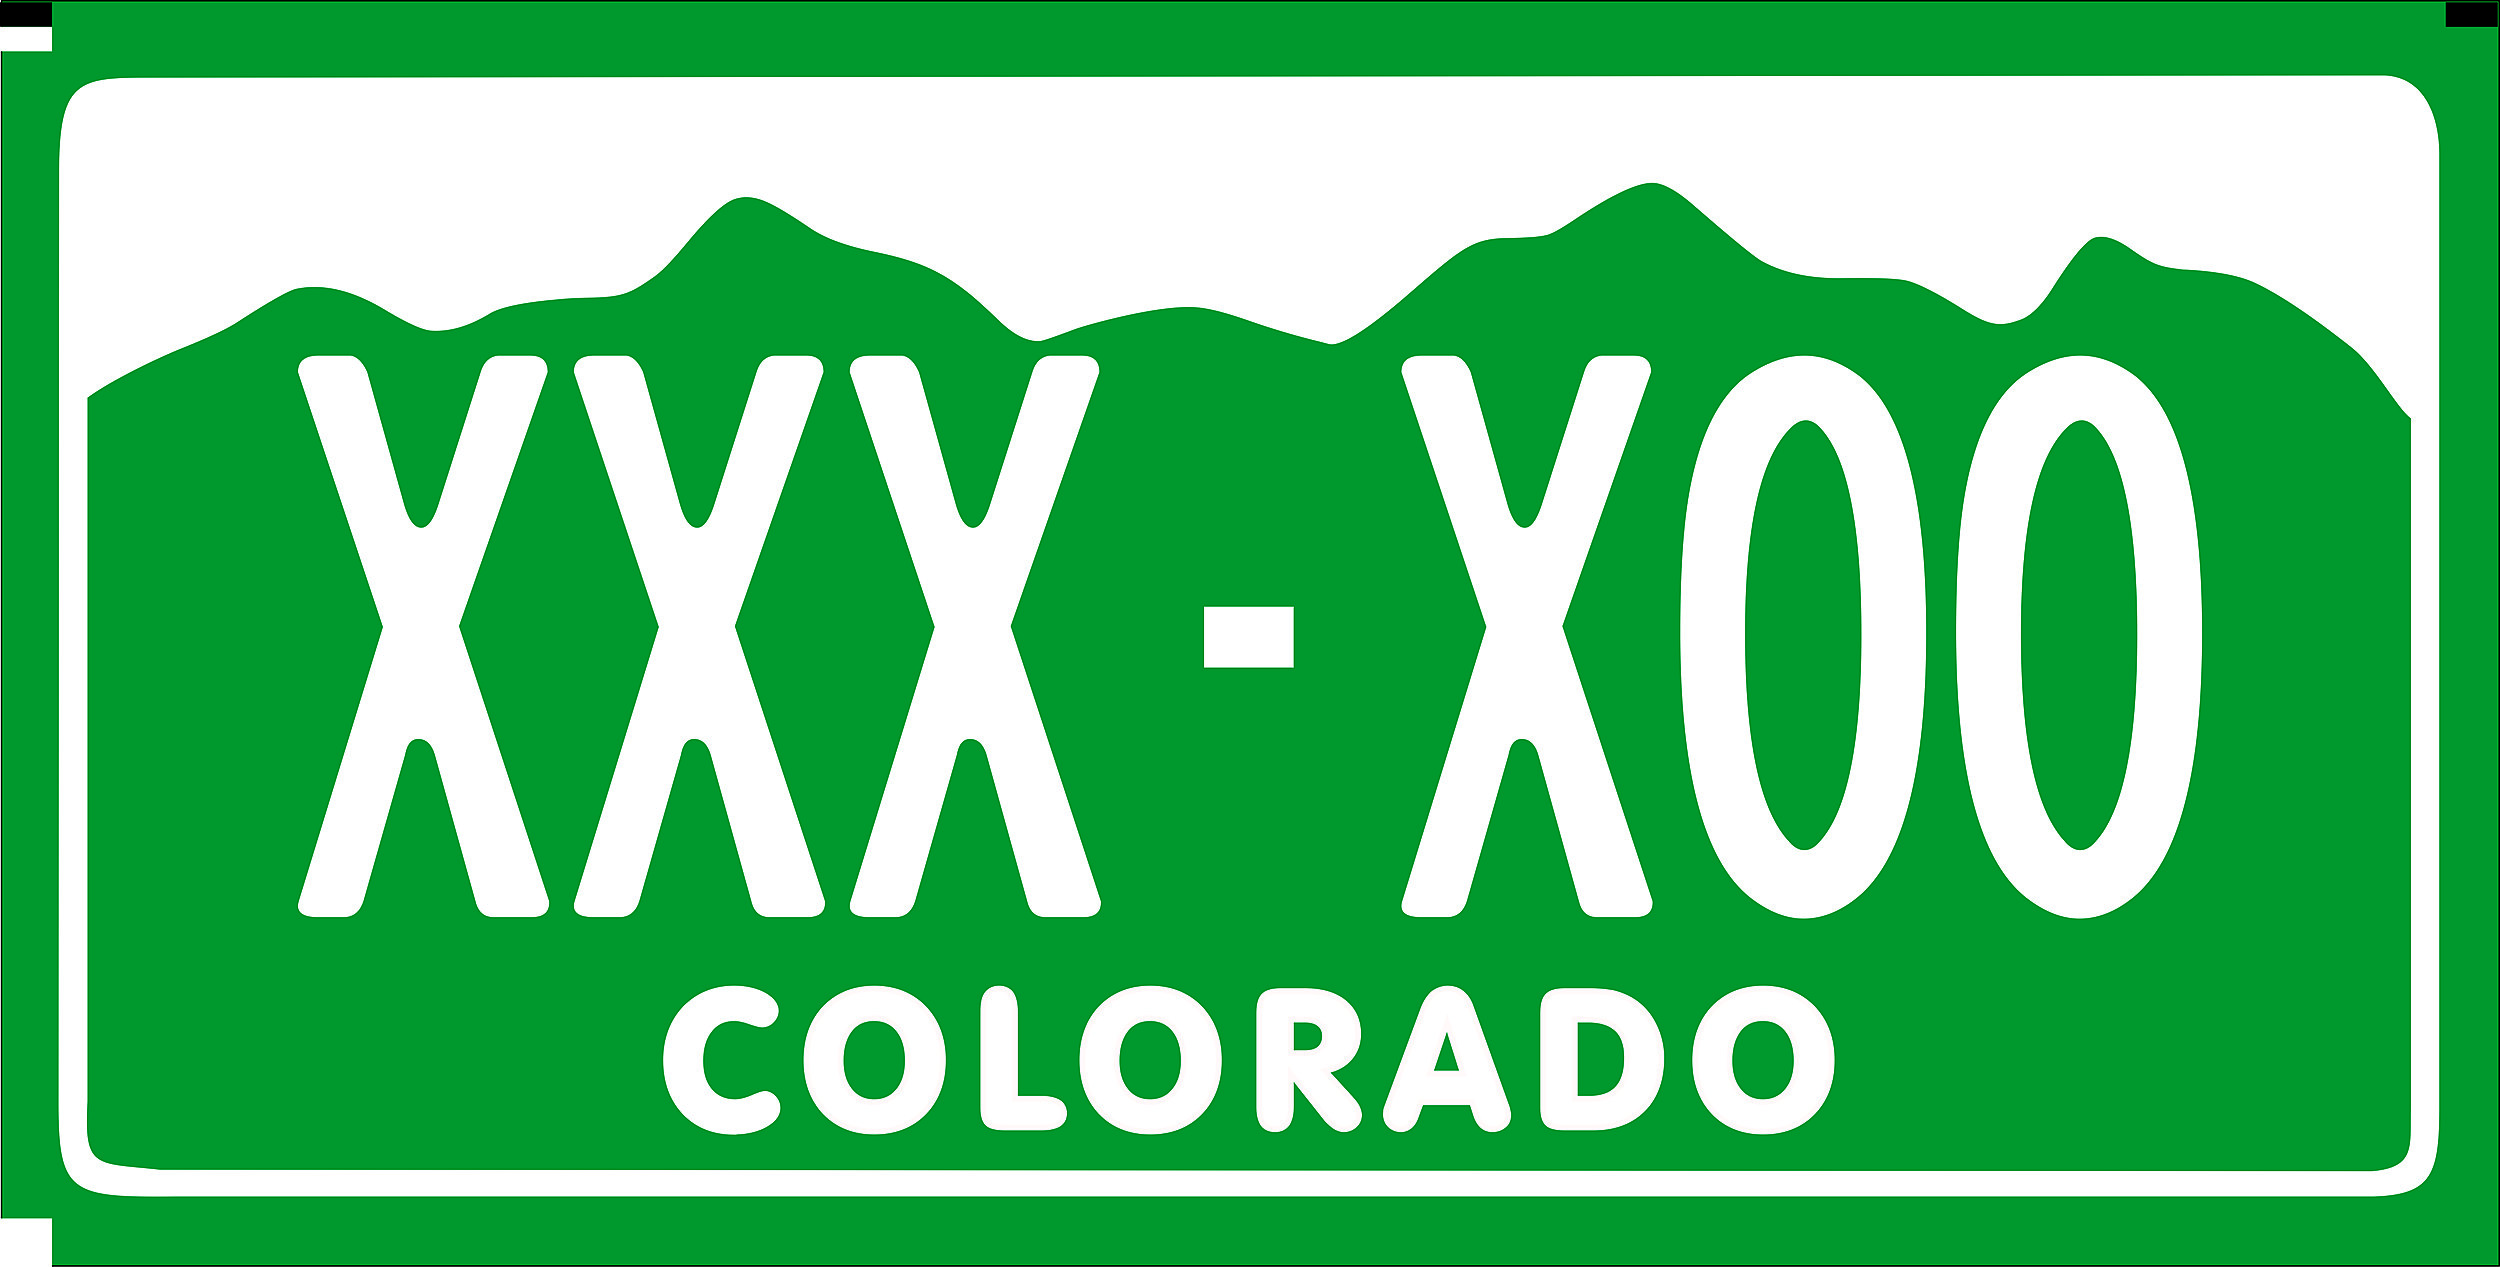 Black License Plates and Other Colors Now Available in Colorado